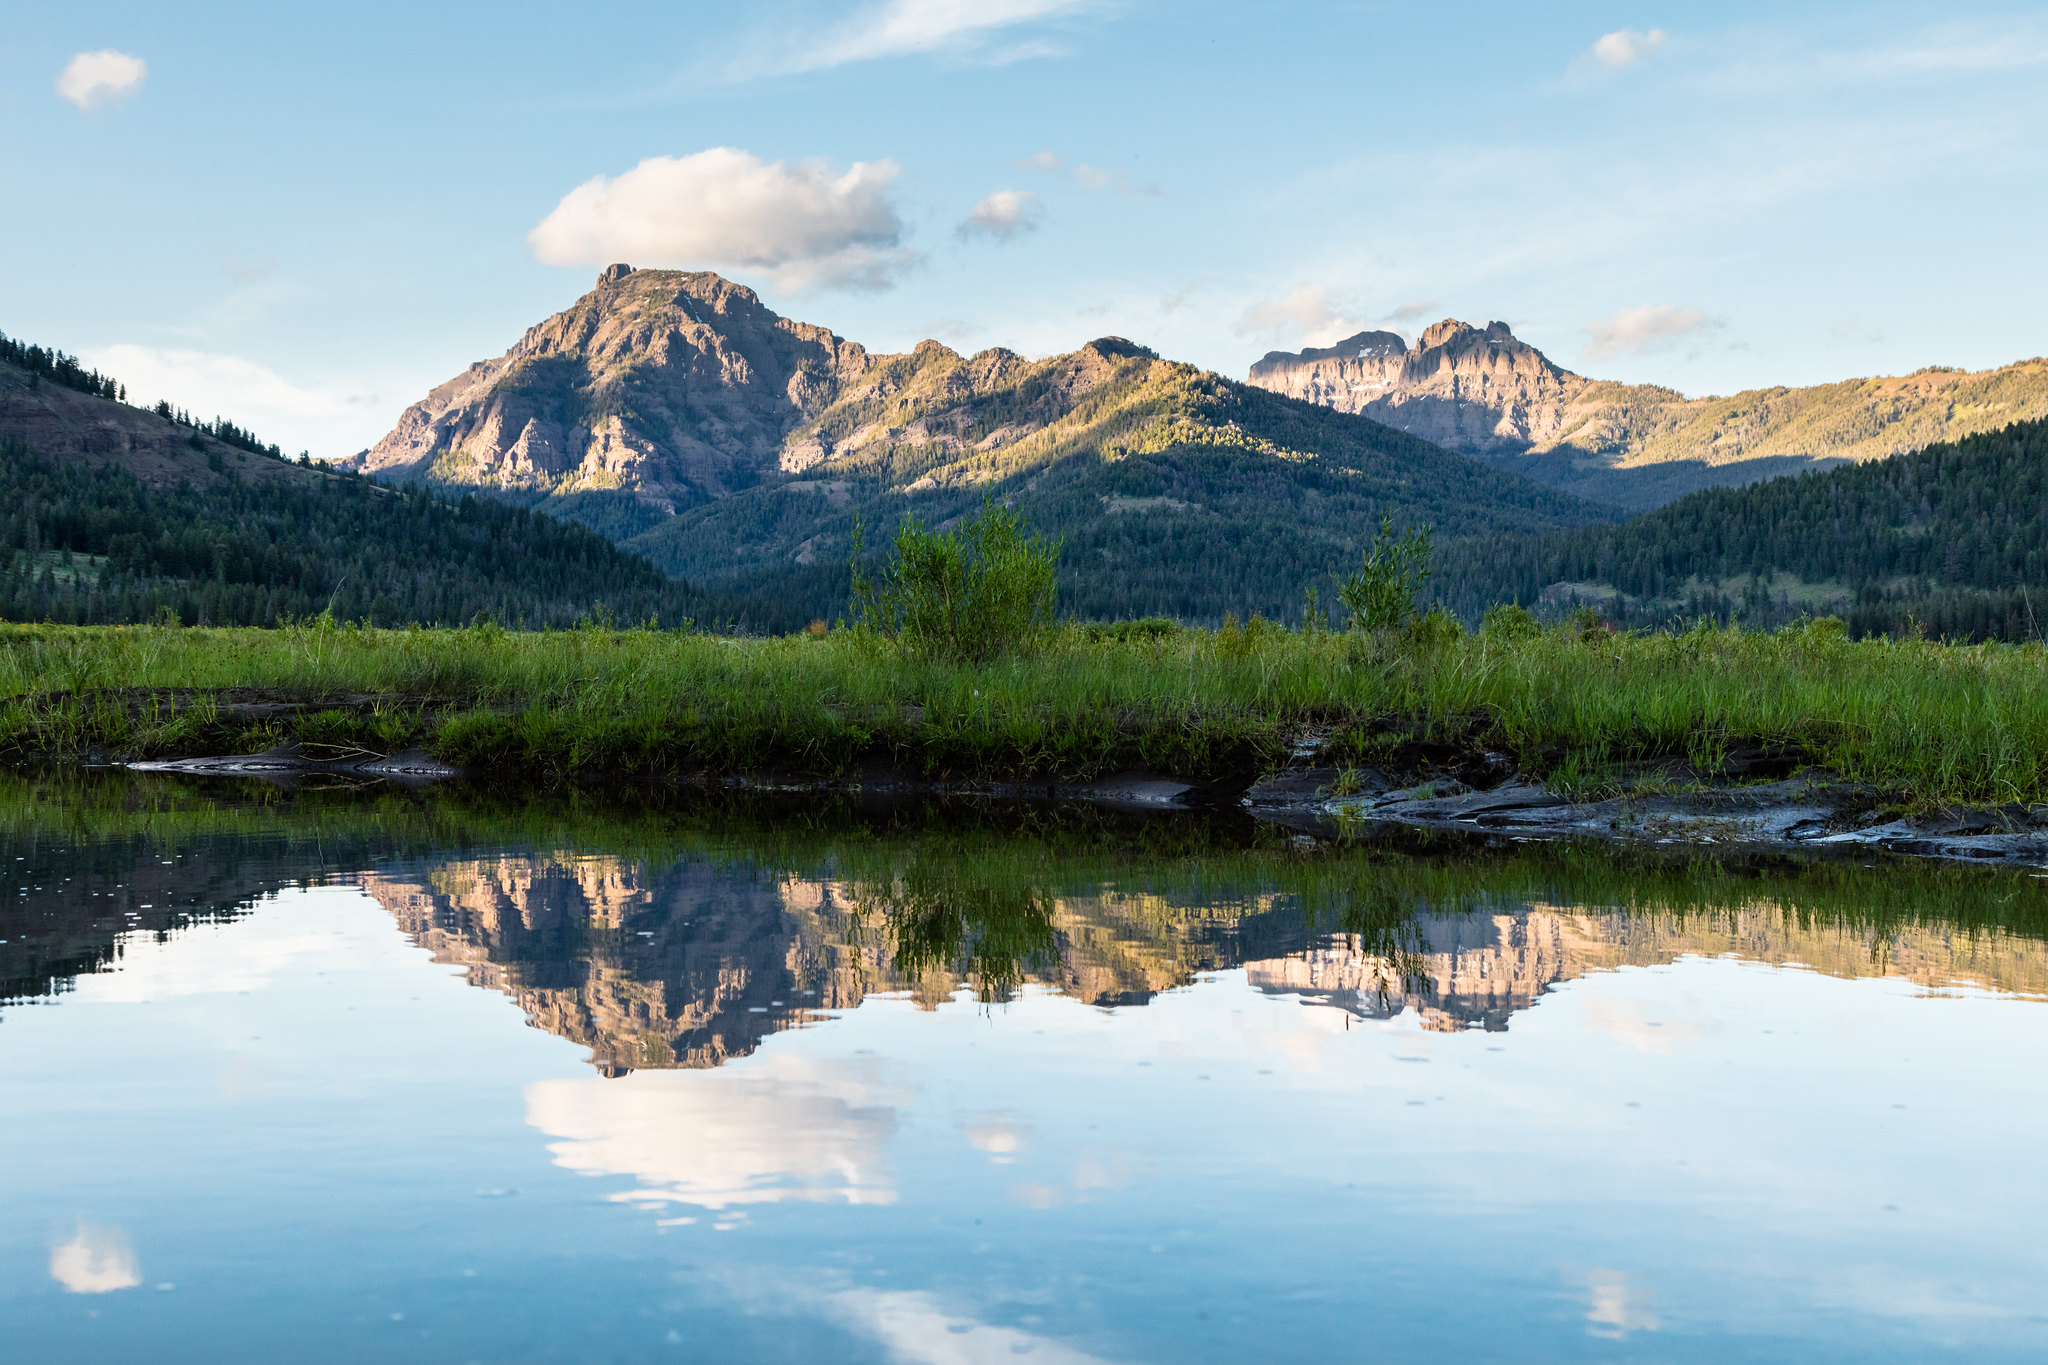 Mountains are reflected in the still waters of Soda Butte Creek at sunset